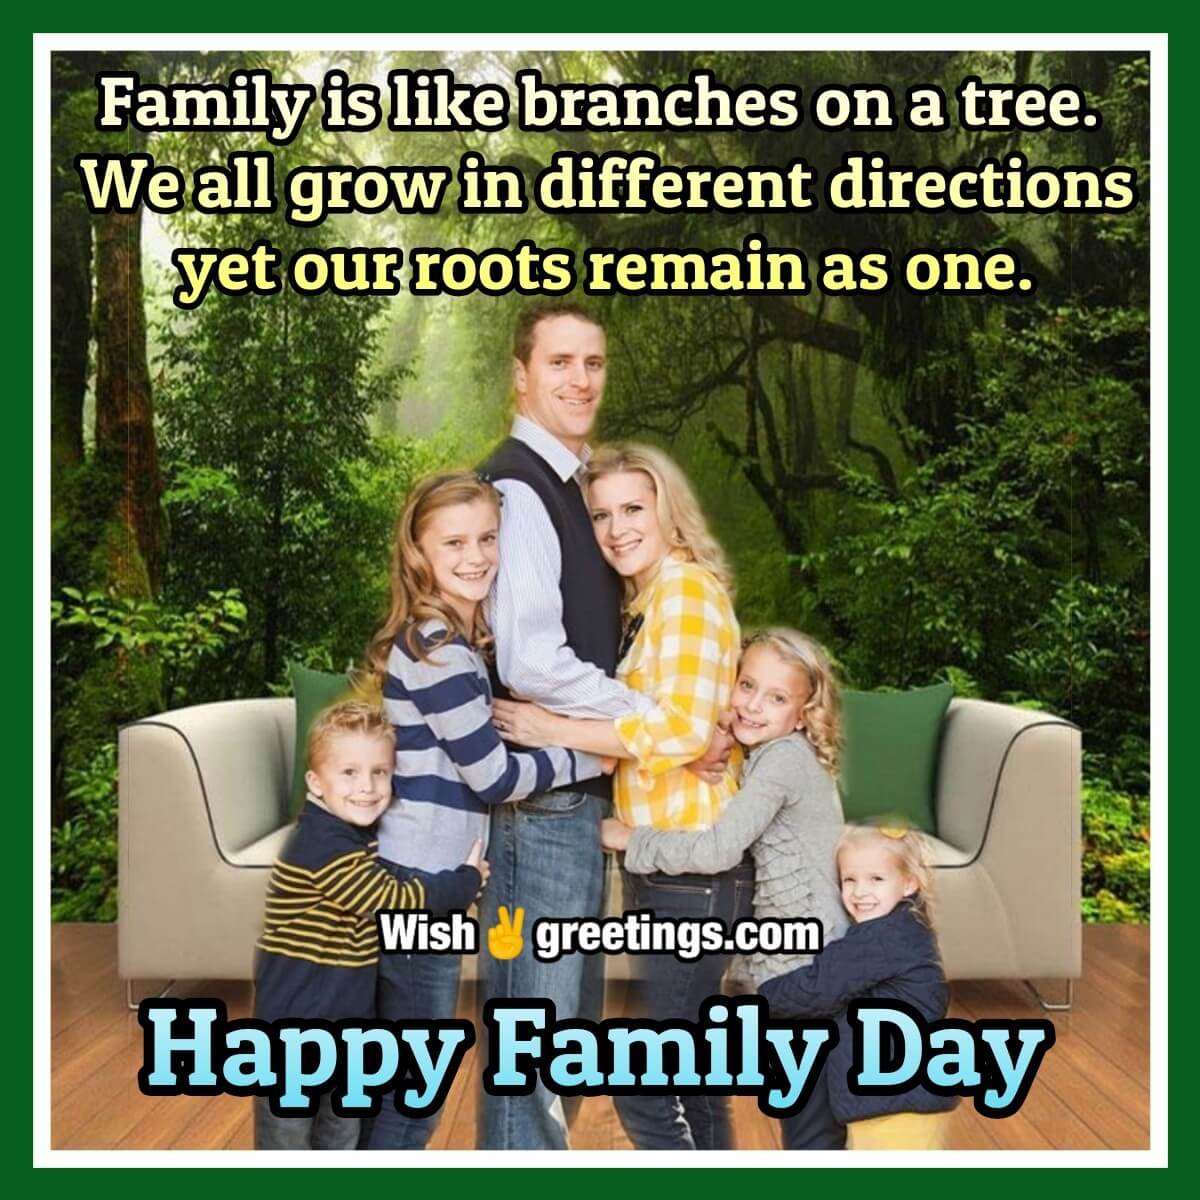 happy-family-day-images-wish-greetings